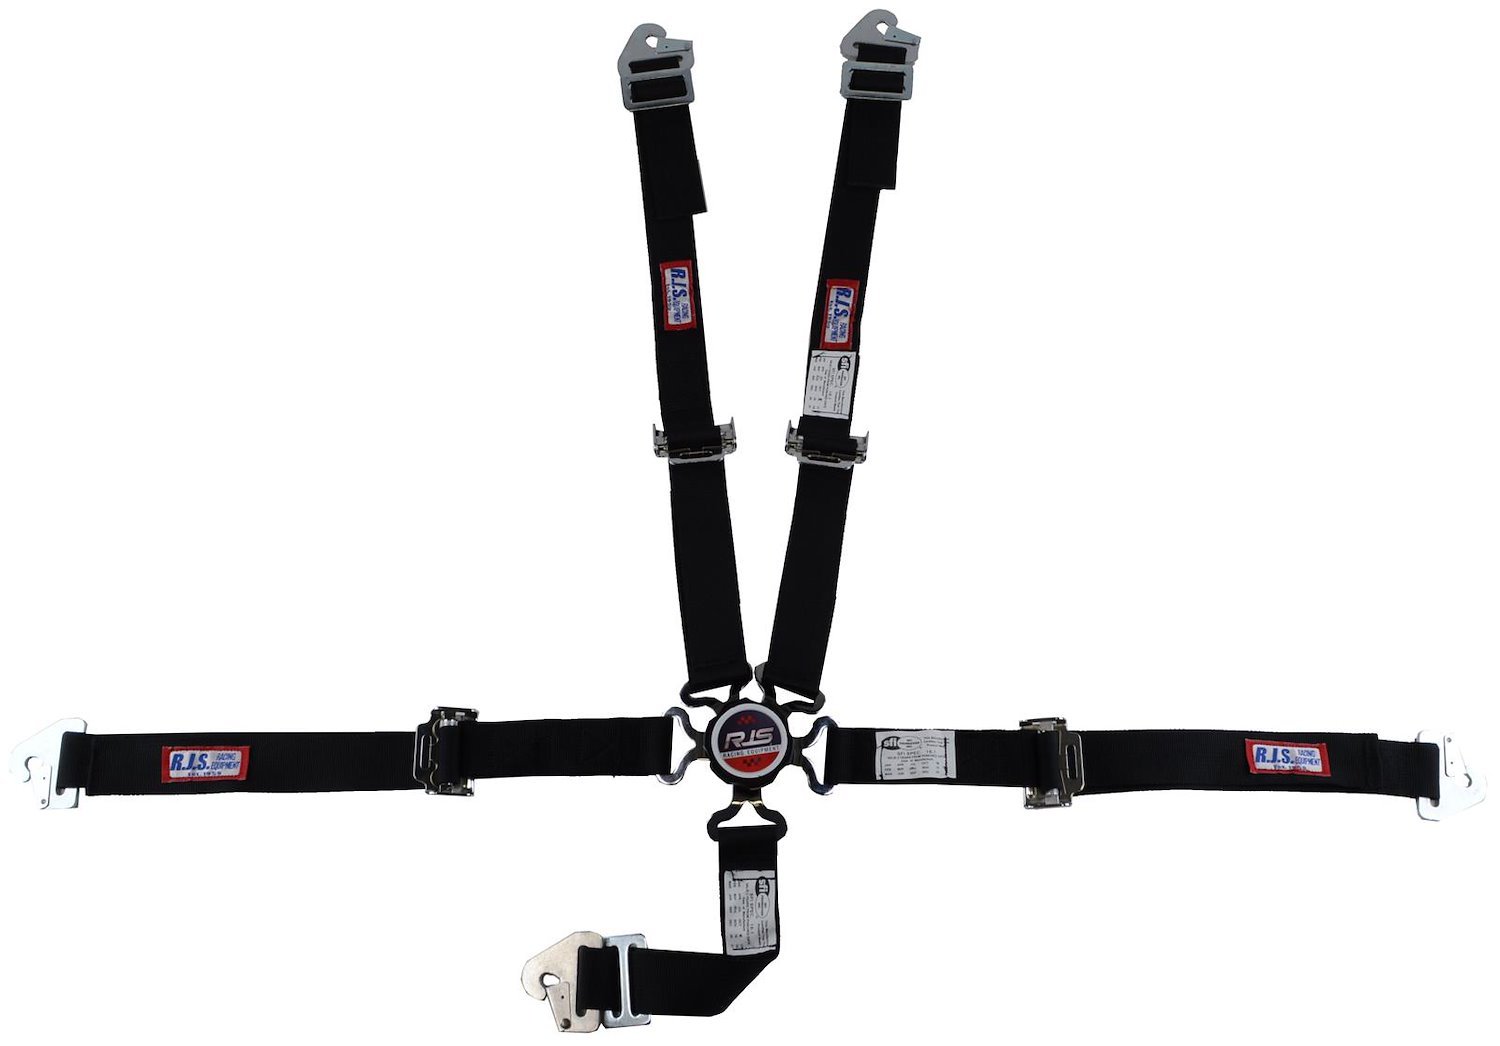 SFI 16.1 CAM-LOCK HARNESS 2 PULL UP Lap Belt 2 Shoulder Harness U ROLL BAR Mount 2 DOUBLE Sub ALL WRAP ENDS w/STERNUM STRAP RED